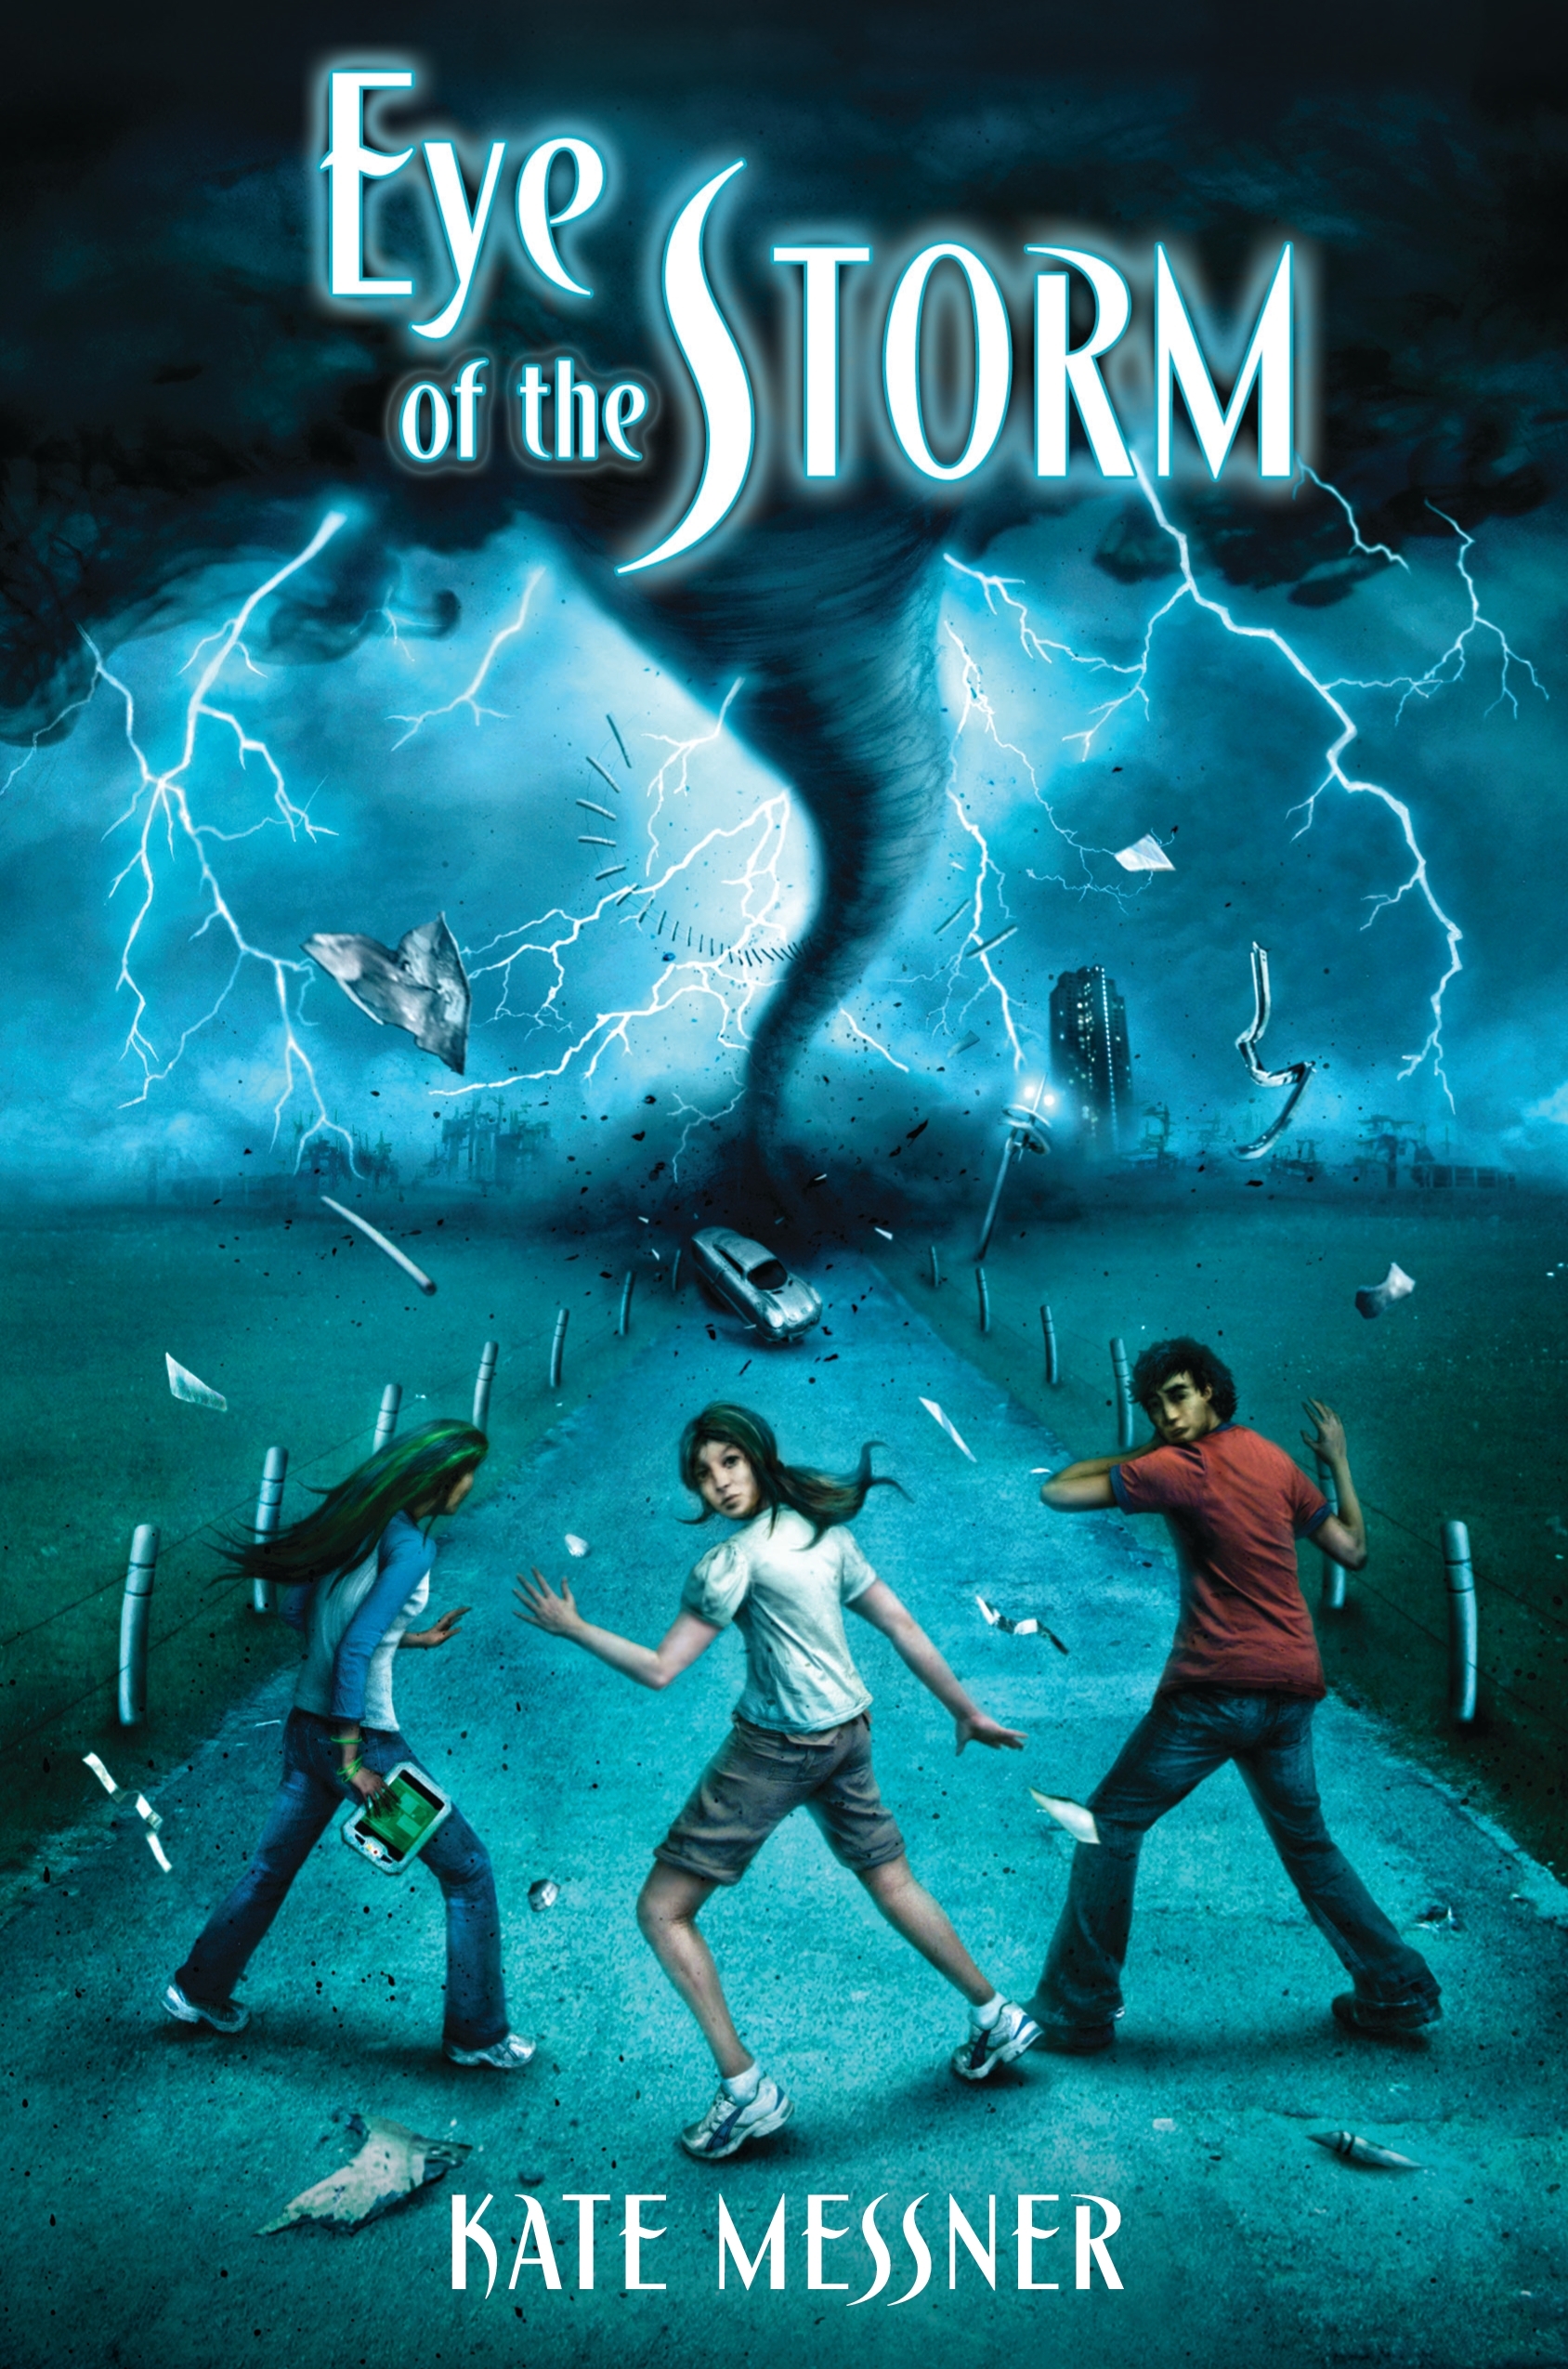 Eye of the Storm (2012) by Kate Messner